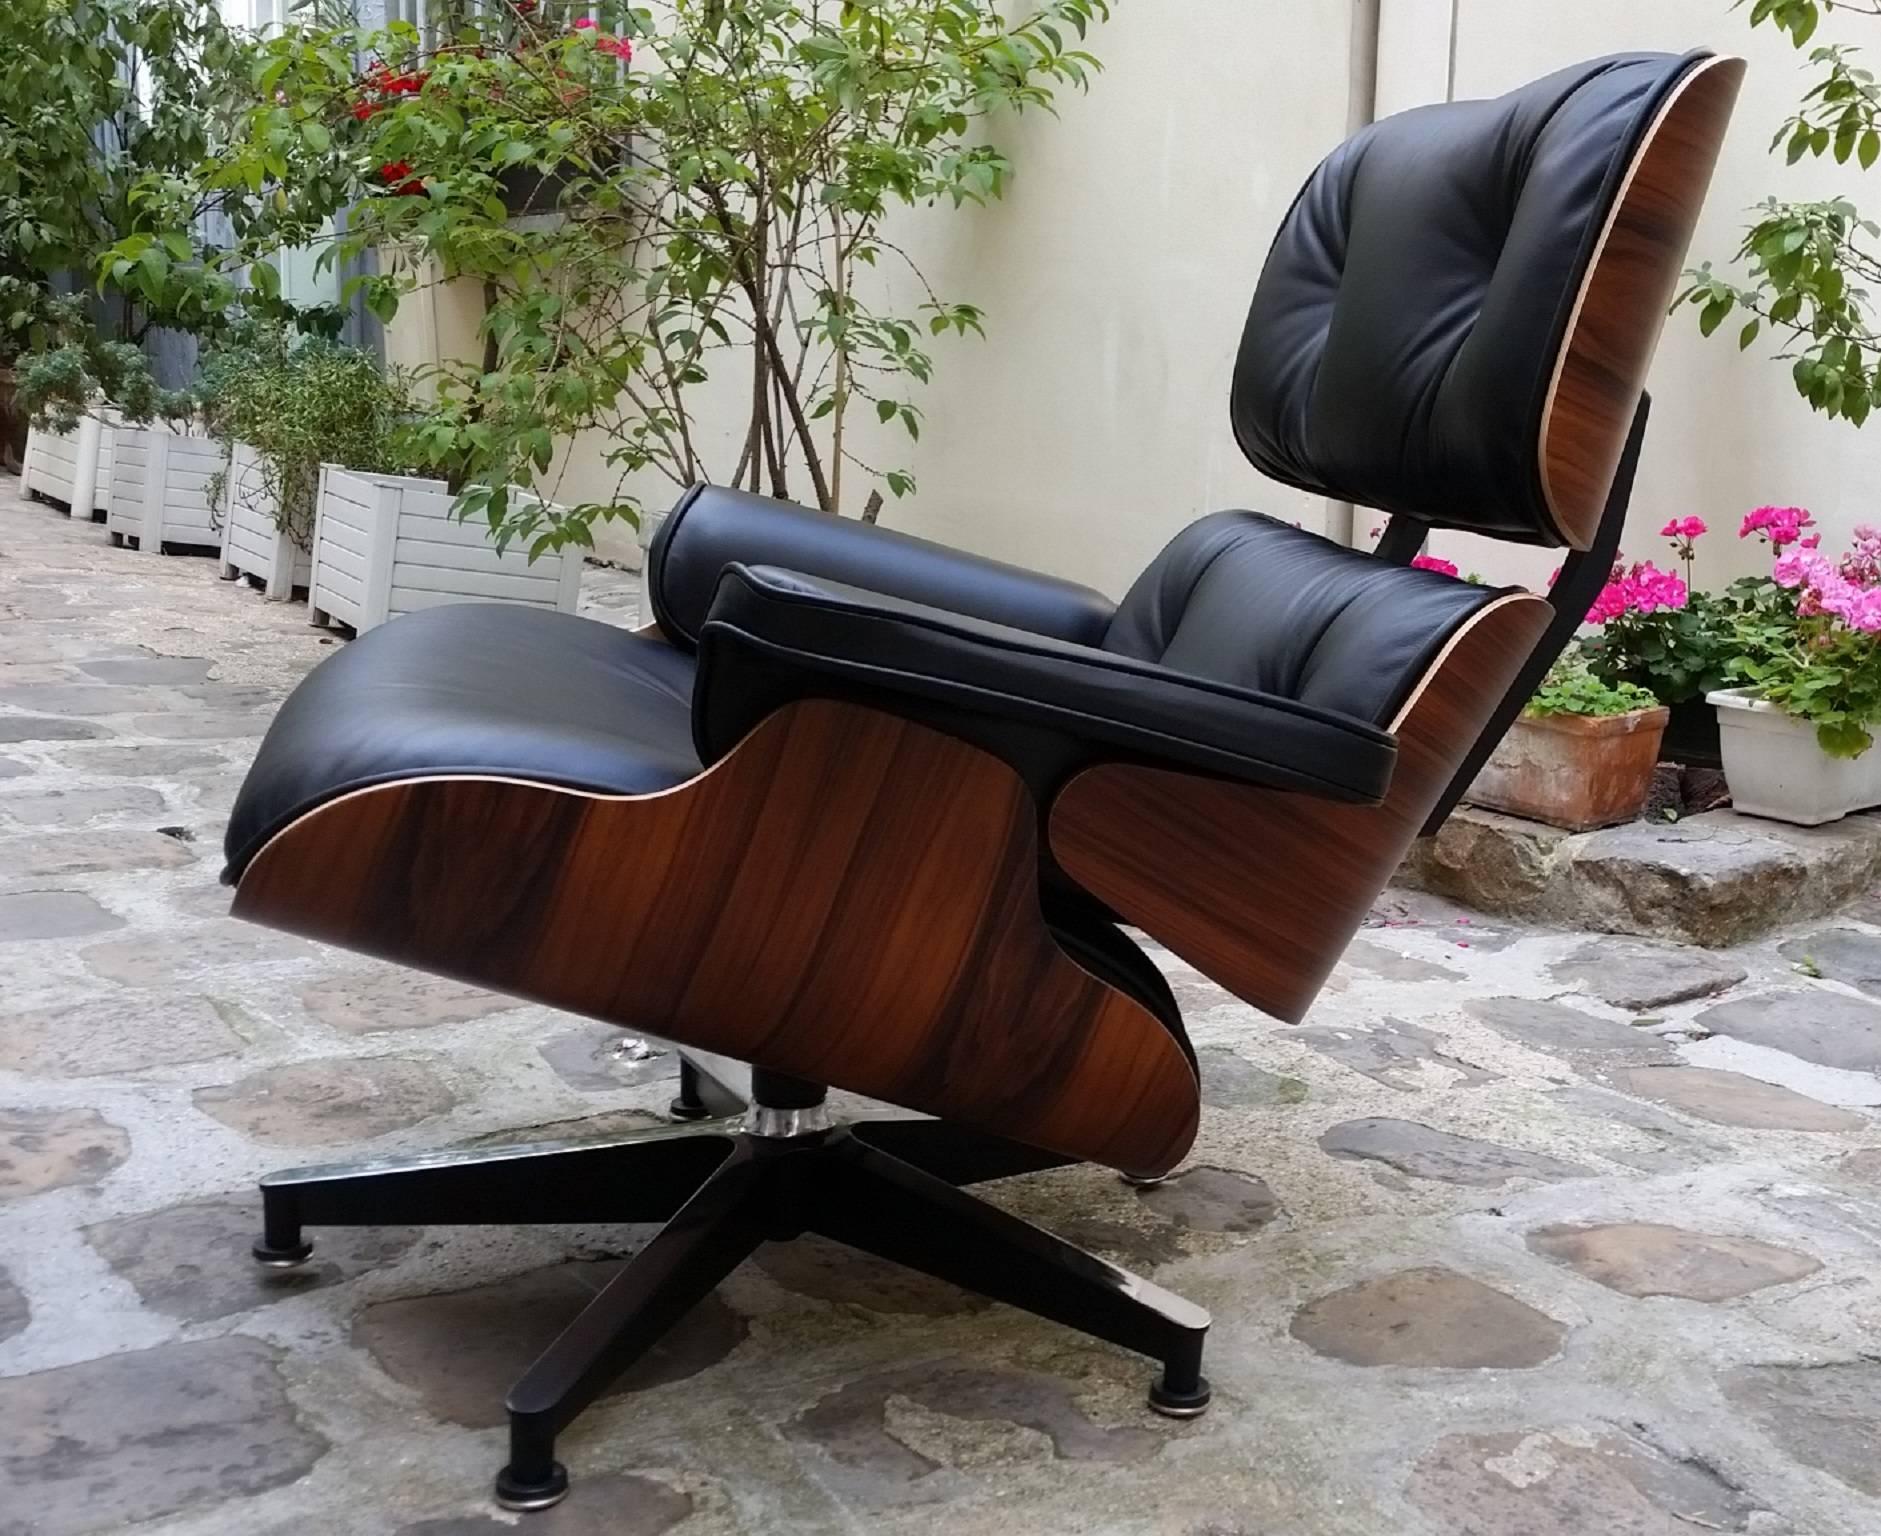 American Lounge Chair Charles Eames and Ottoman, Black